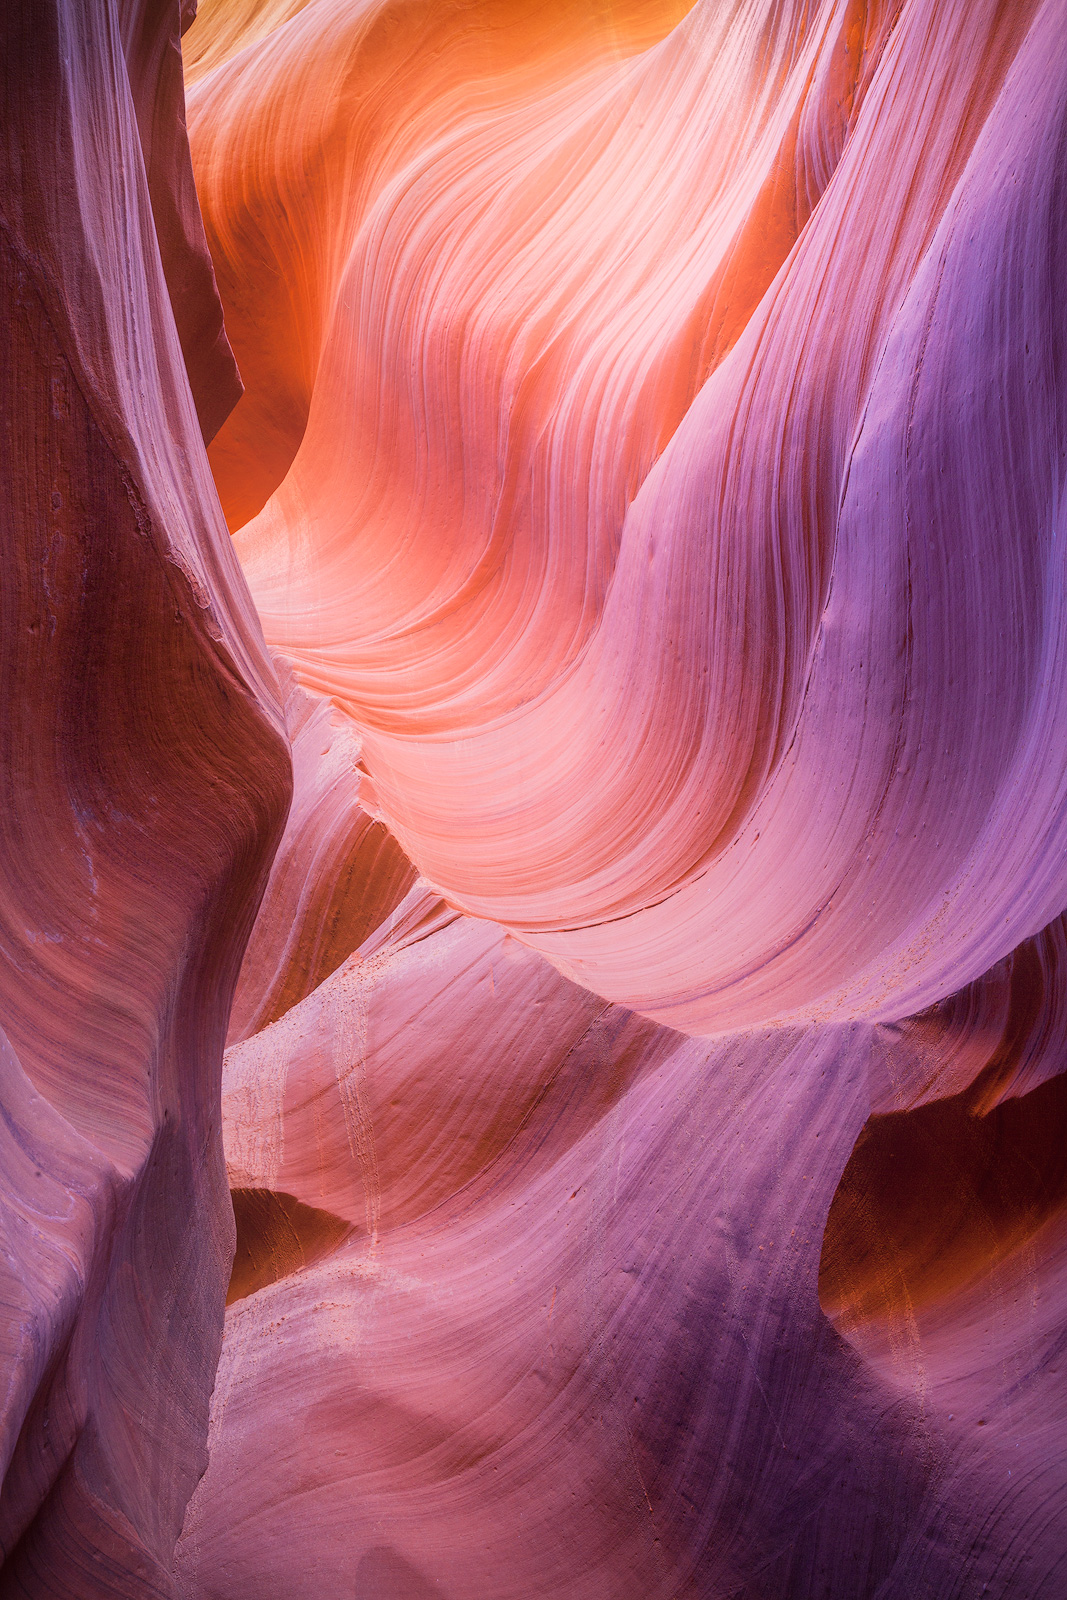 Deep magenta and orange wave-like formations in a slot canyon in the Navajo Nation.